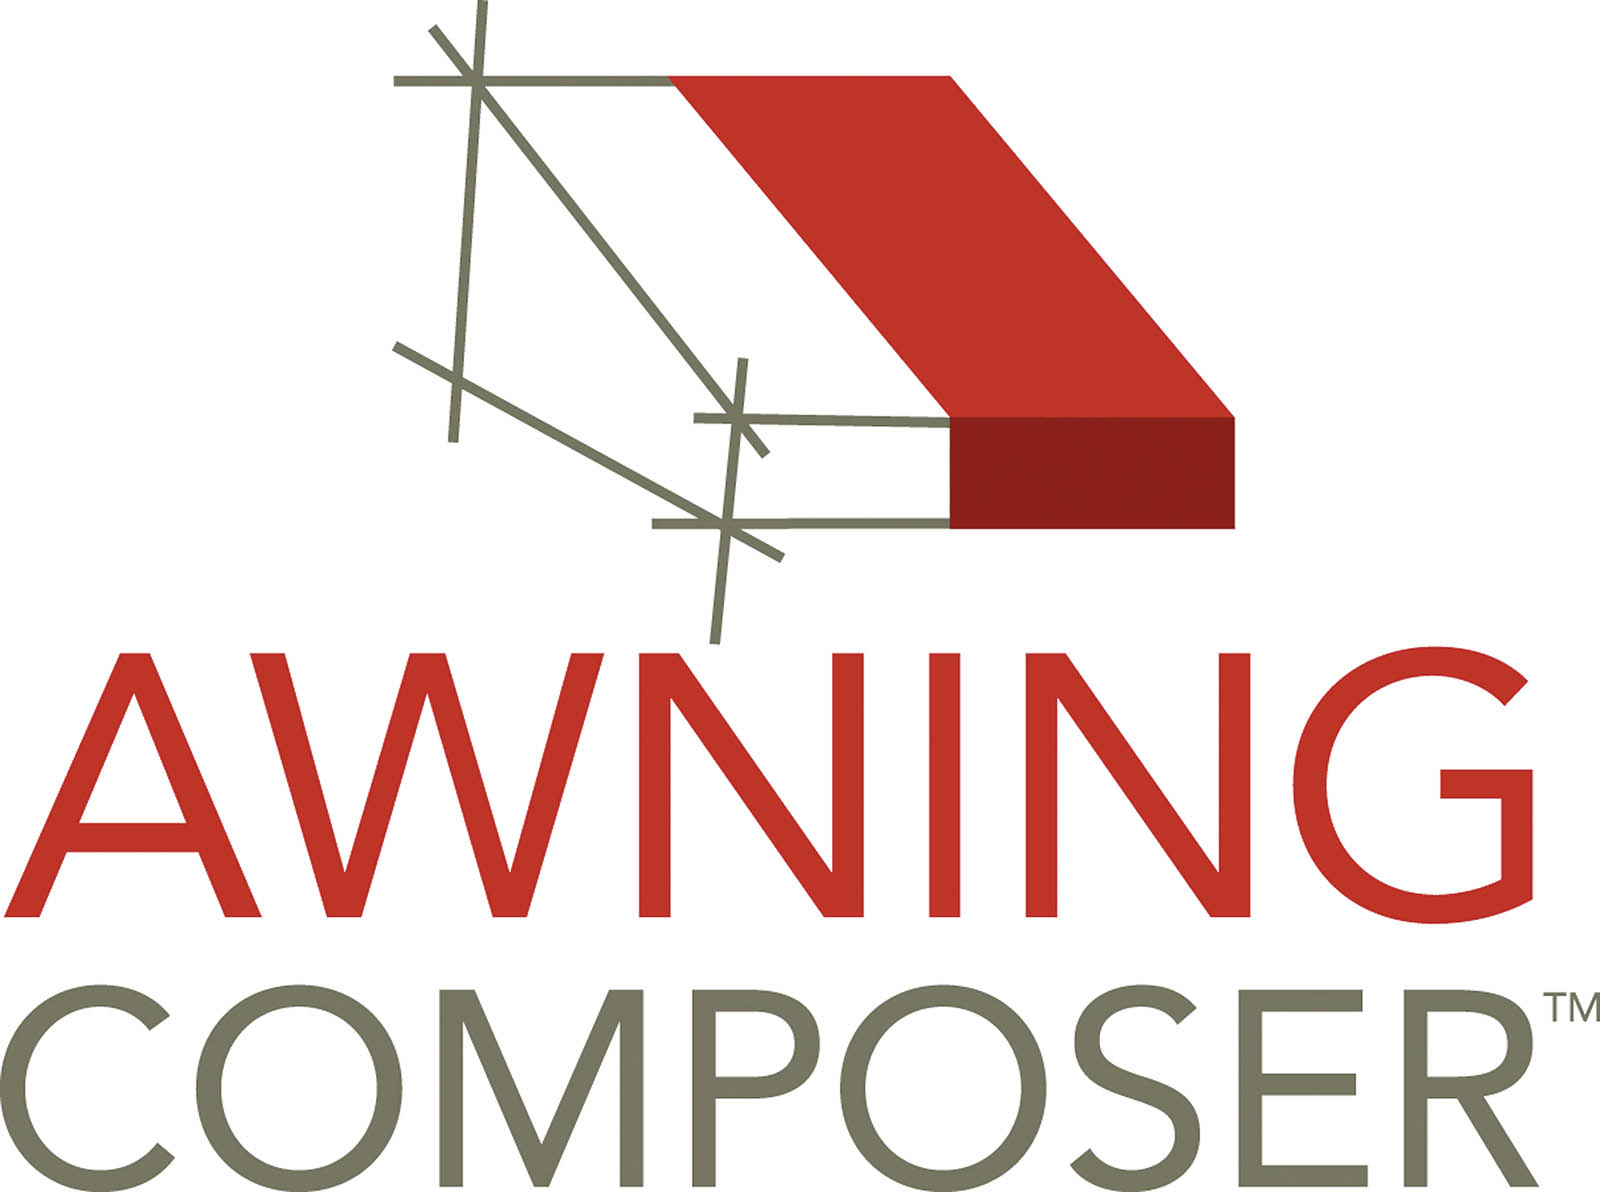 Awning Composer® Engineering Services Image